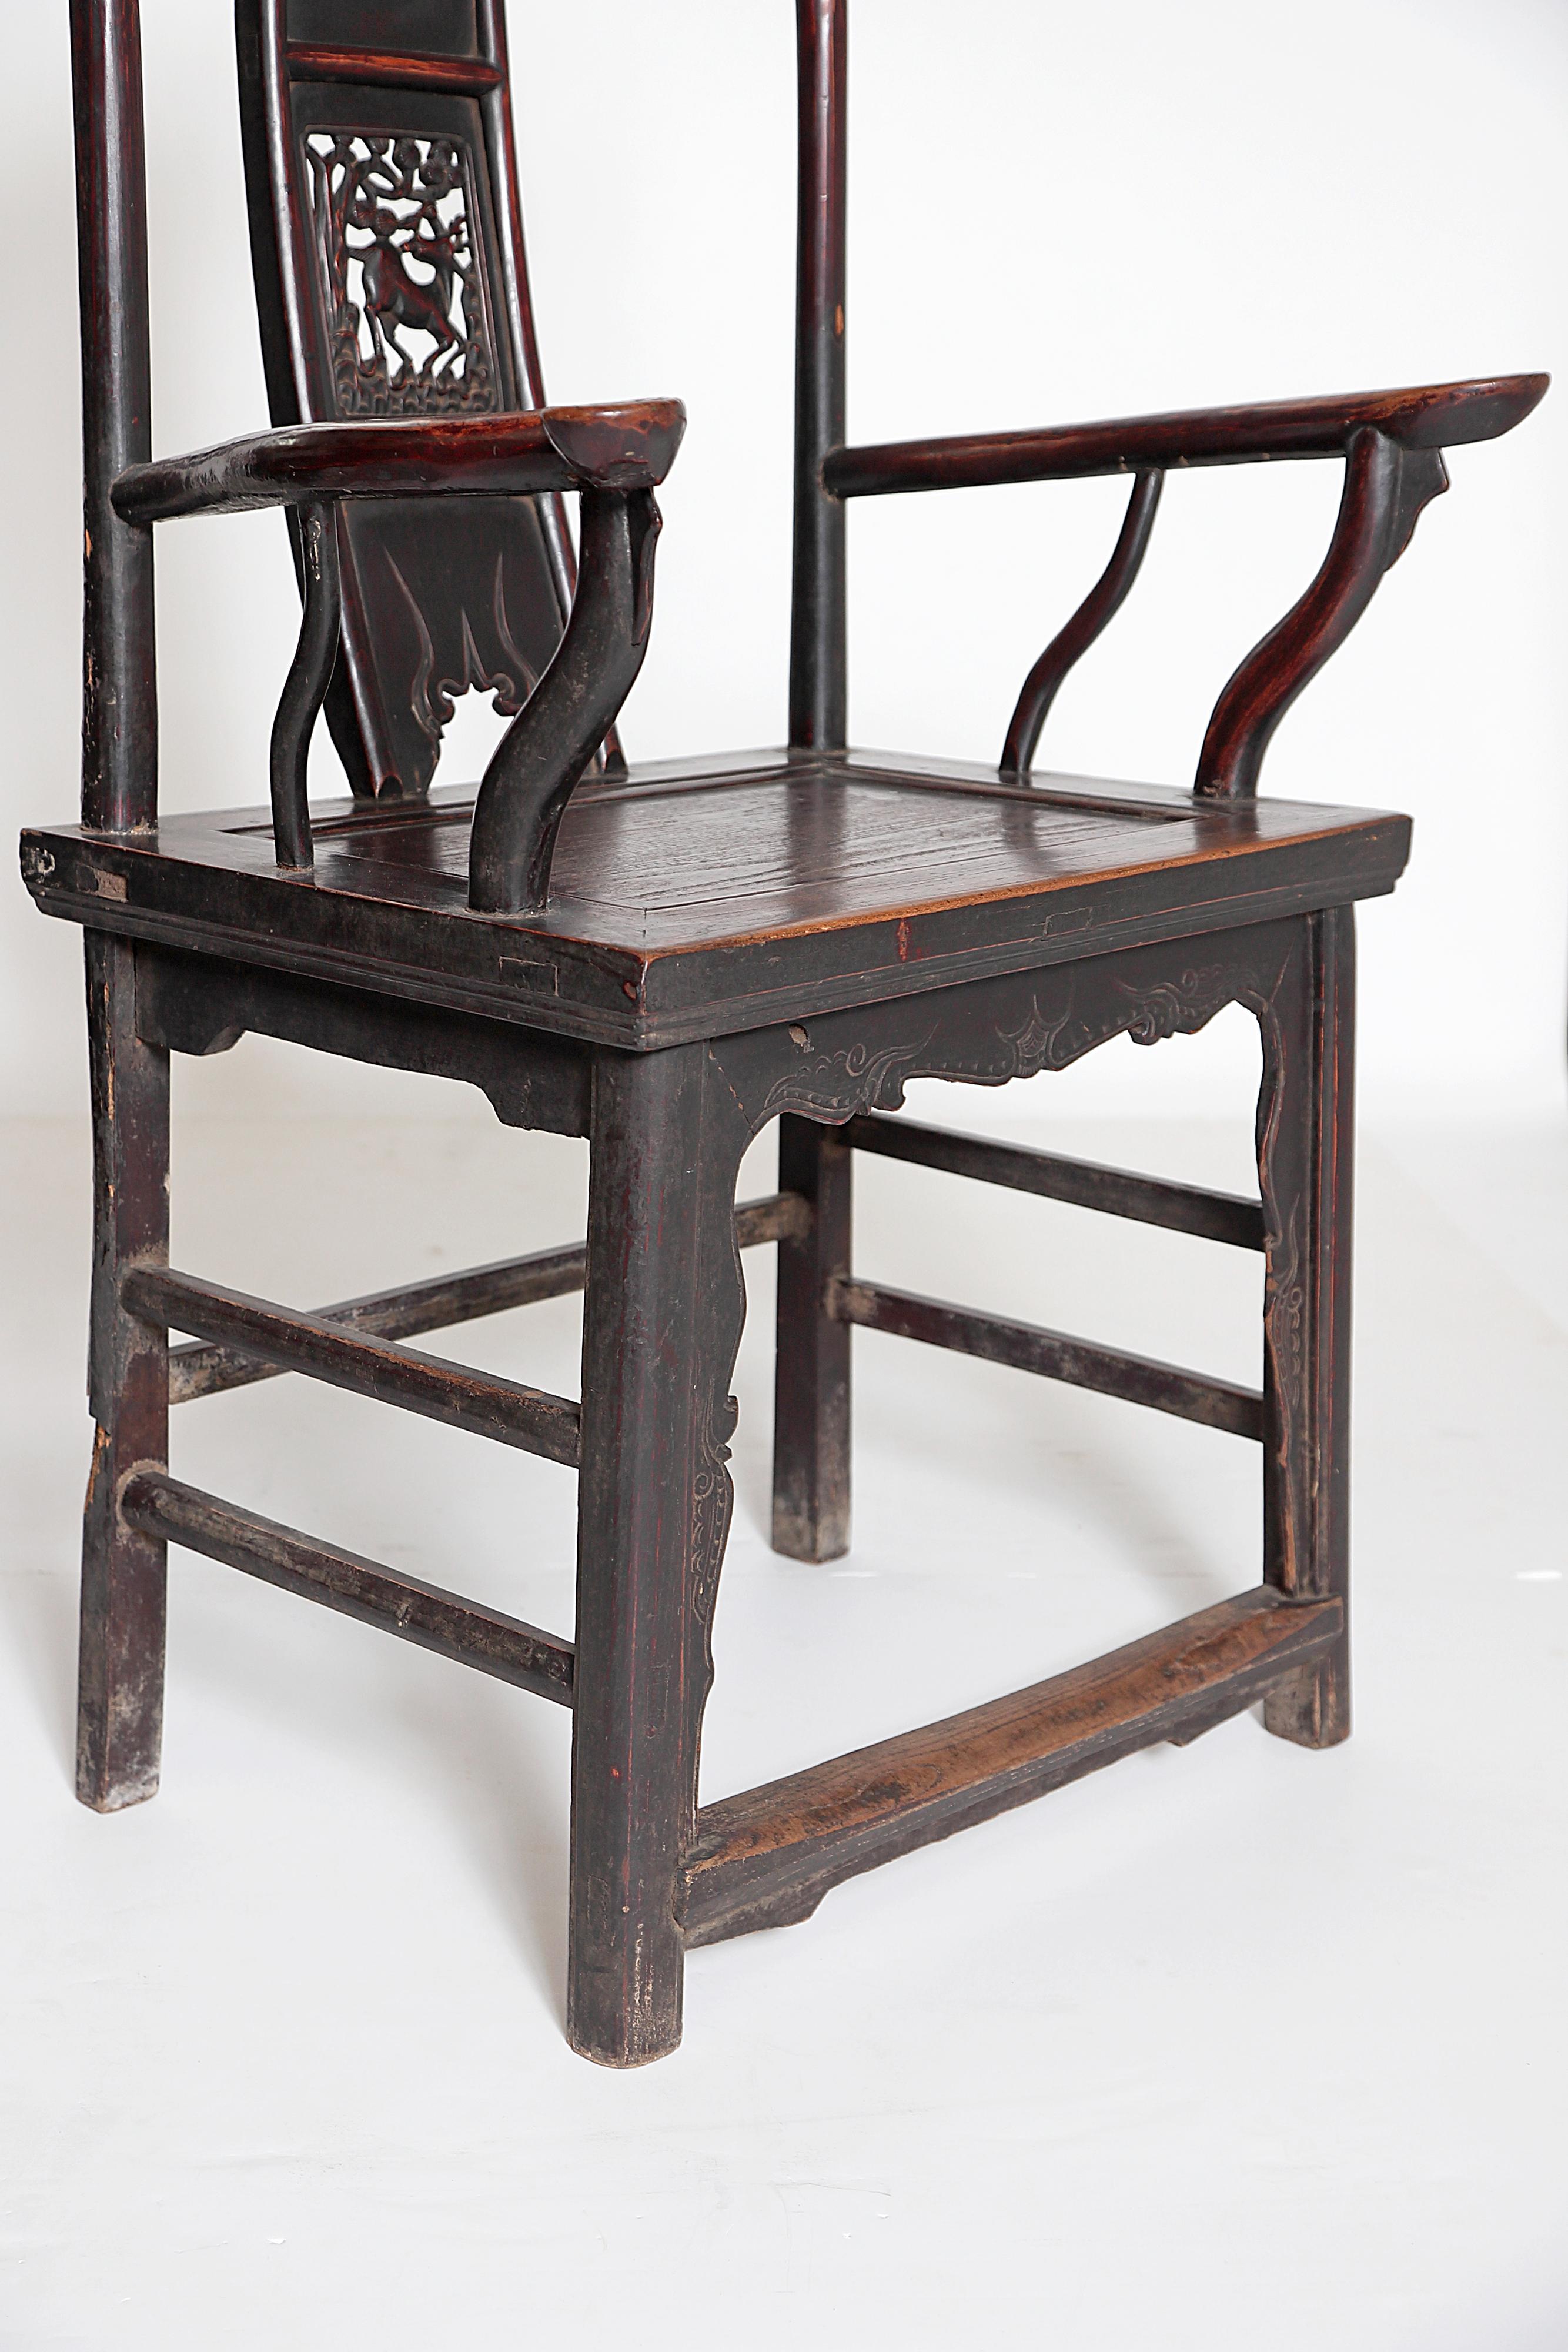 19th Century Pair of Chinese Scholar's Chairs